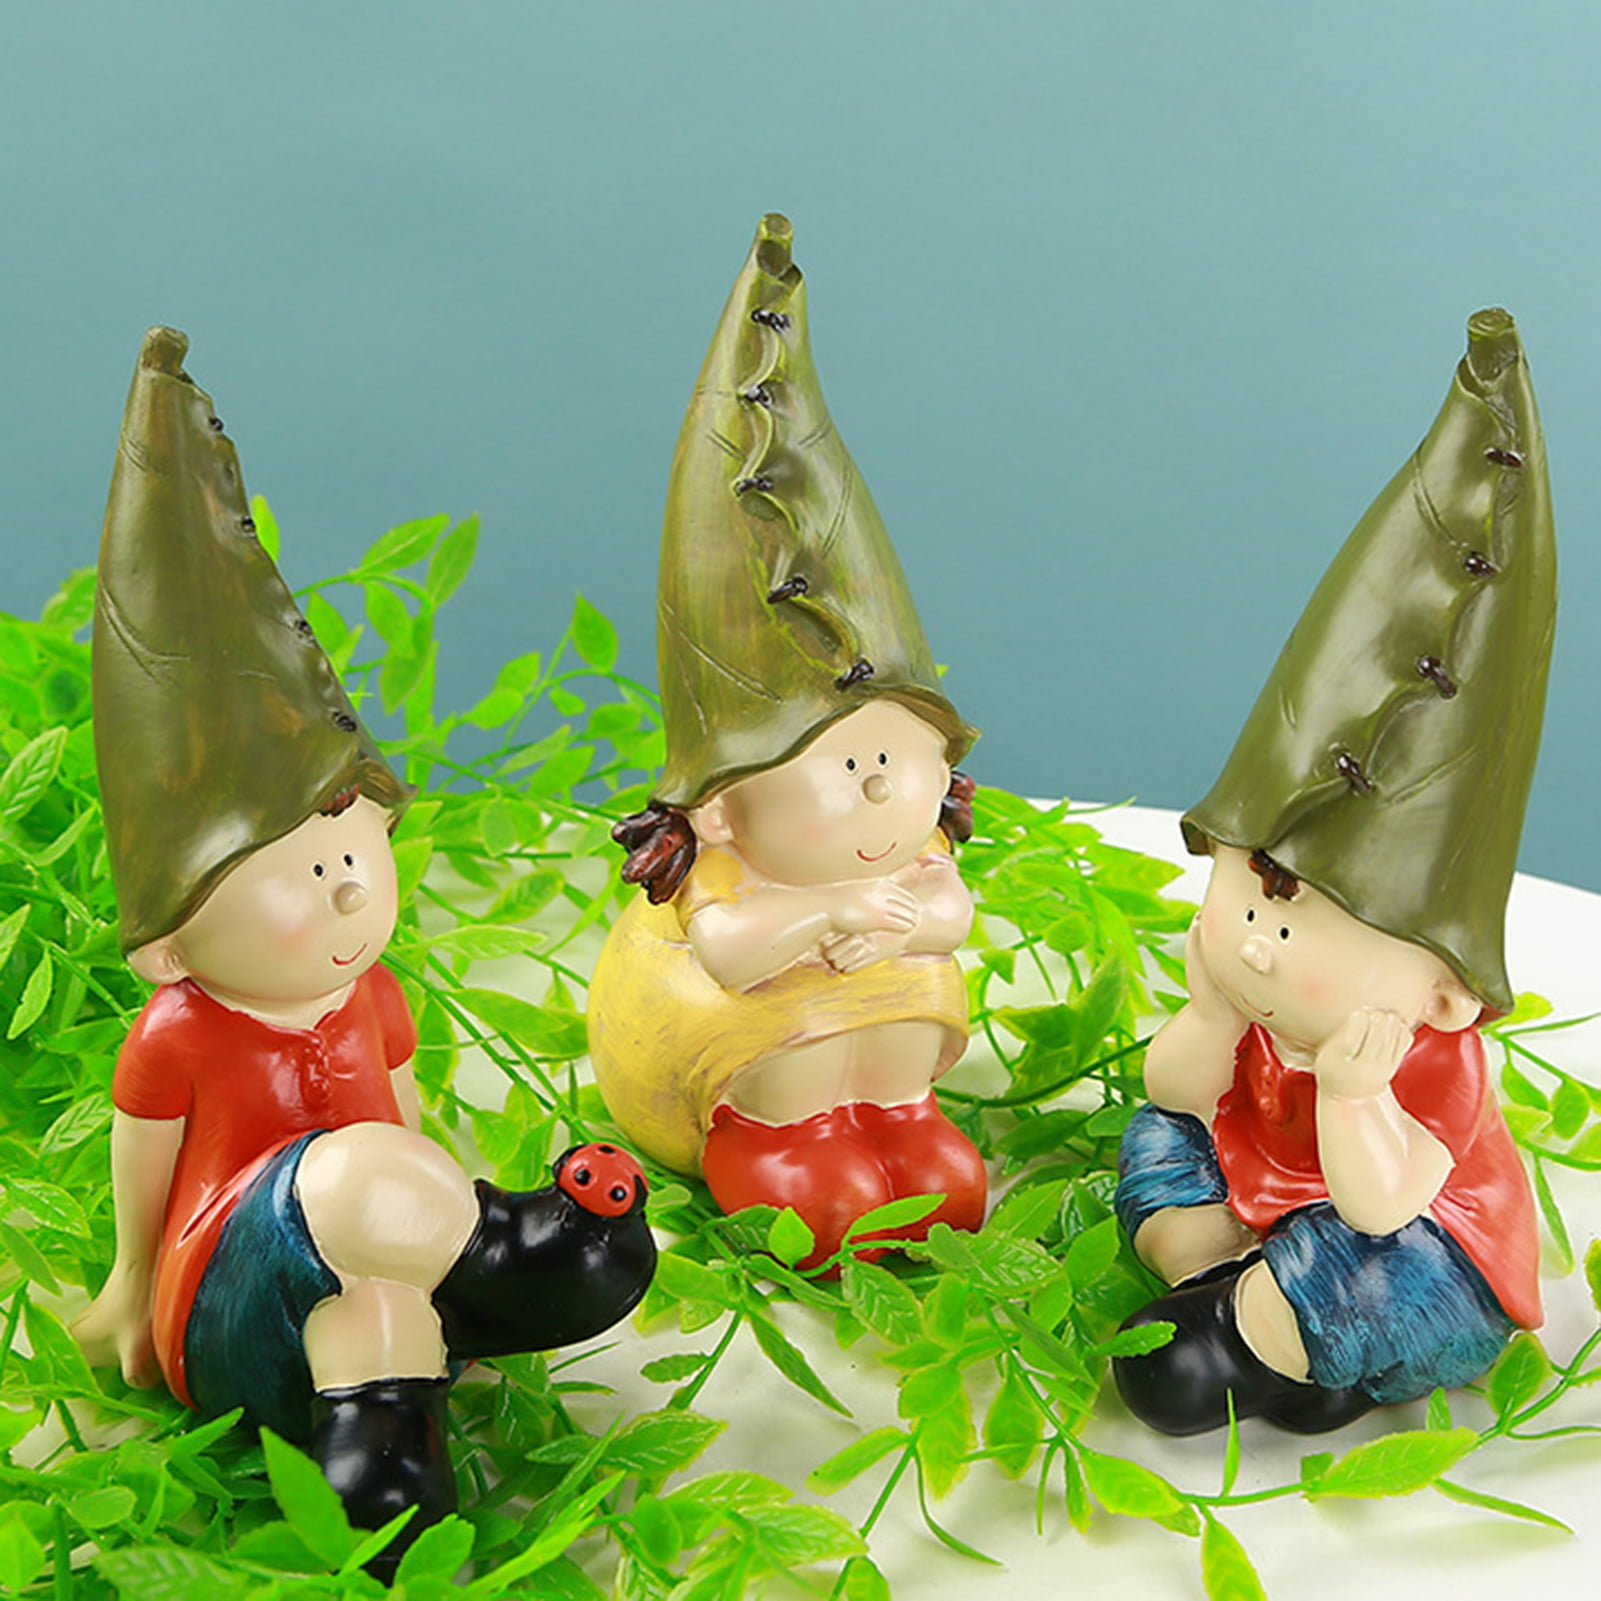 #4 Miniature Handmade Colourful Funny Clay Gnomes Decor Decorations Ornaments Outdoor Fairy Garden Figurines Toys & Games Funny Gnome Collectible Figurines Family Couples Furniture Sets 